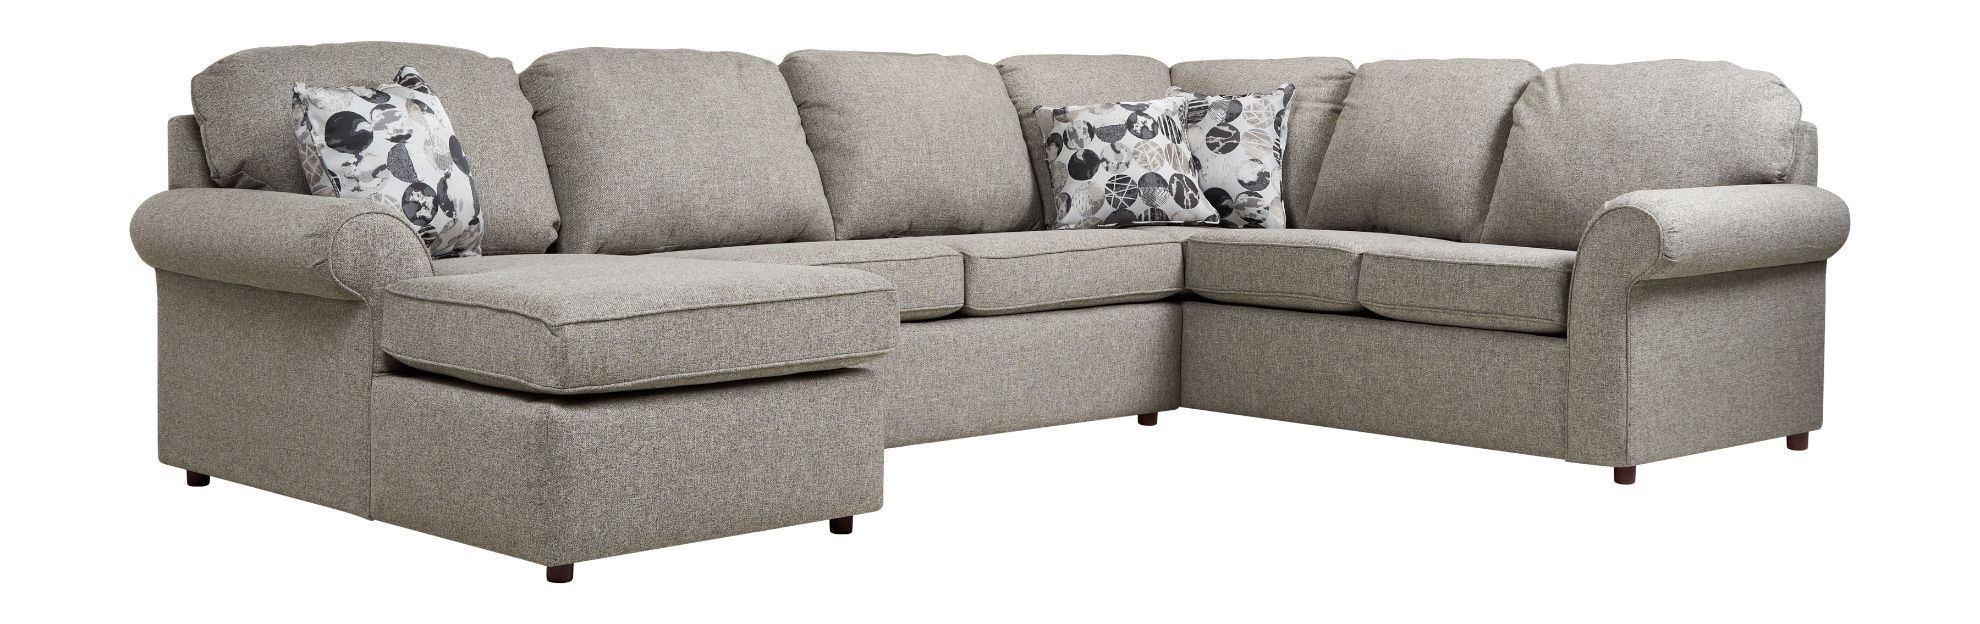 Brentwood 3pc Sectional